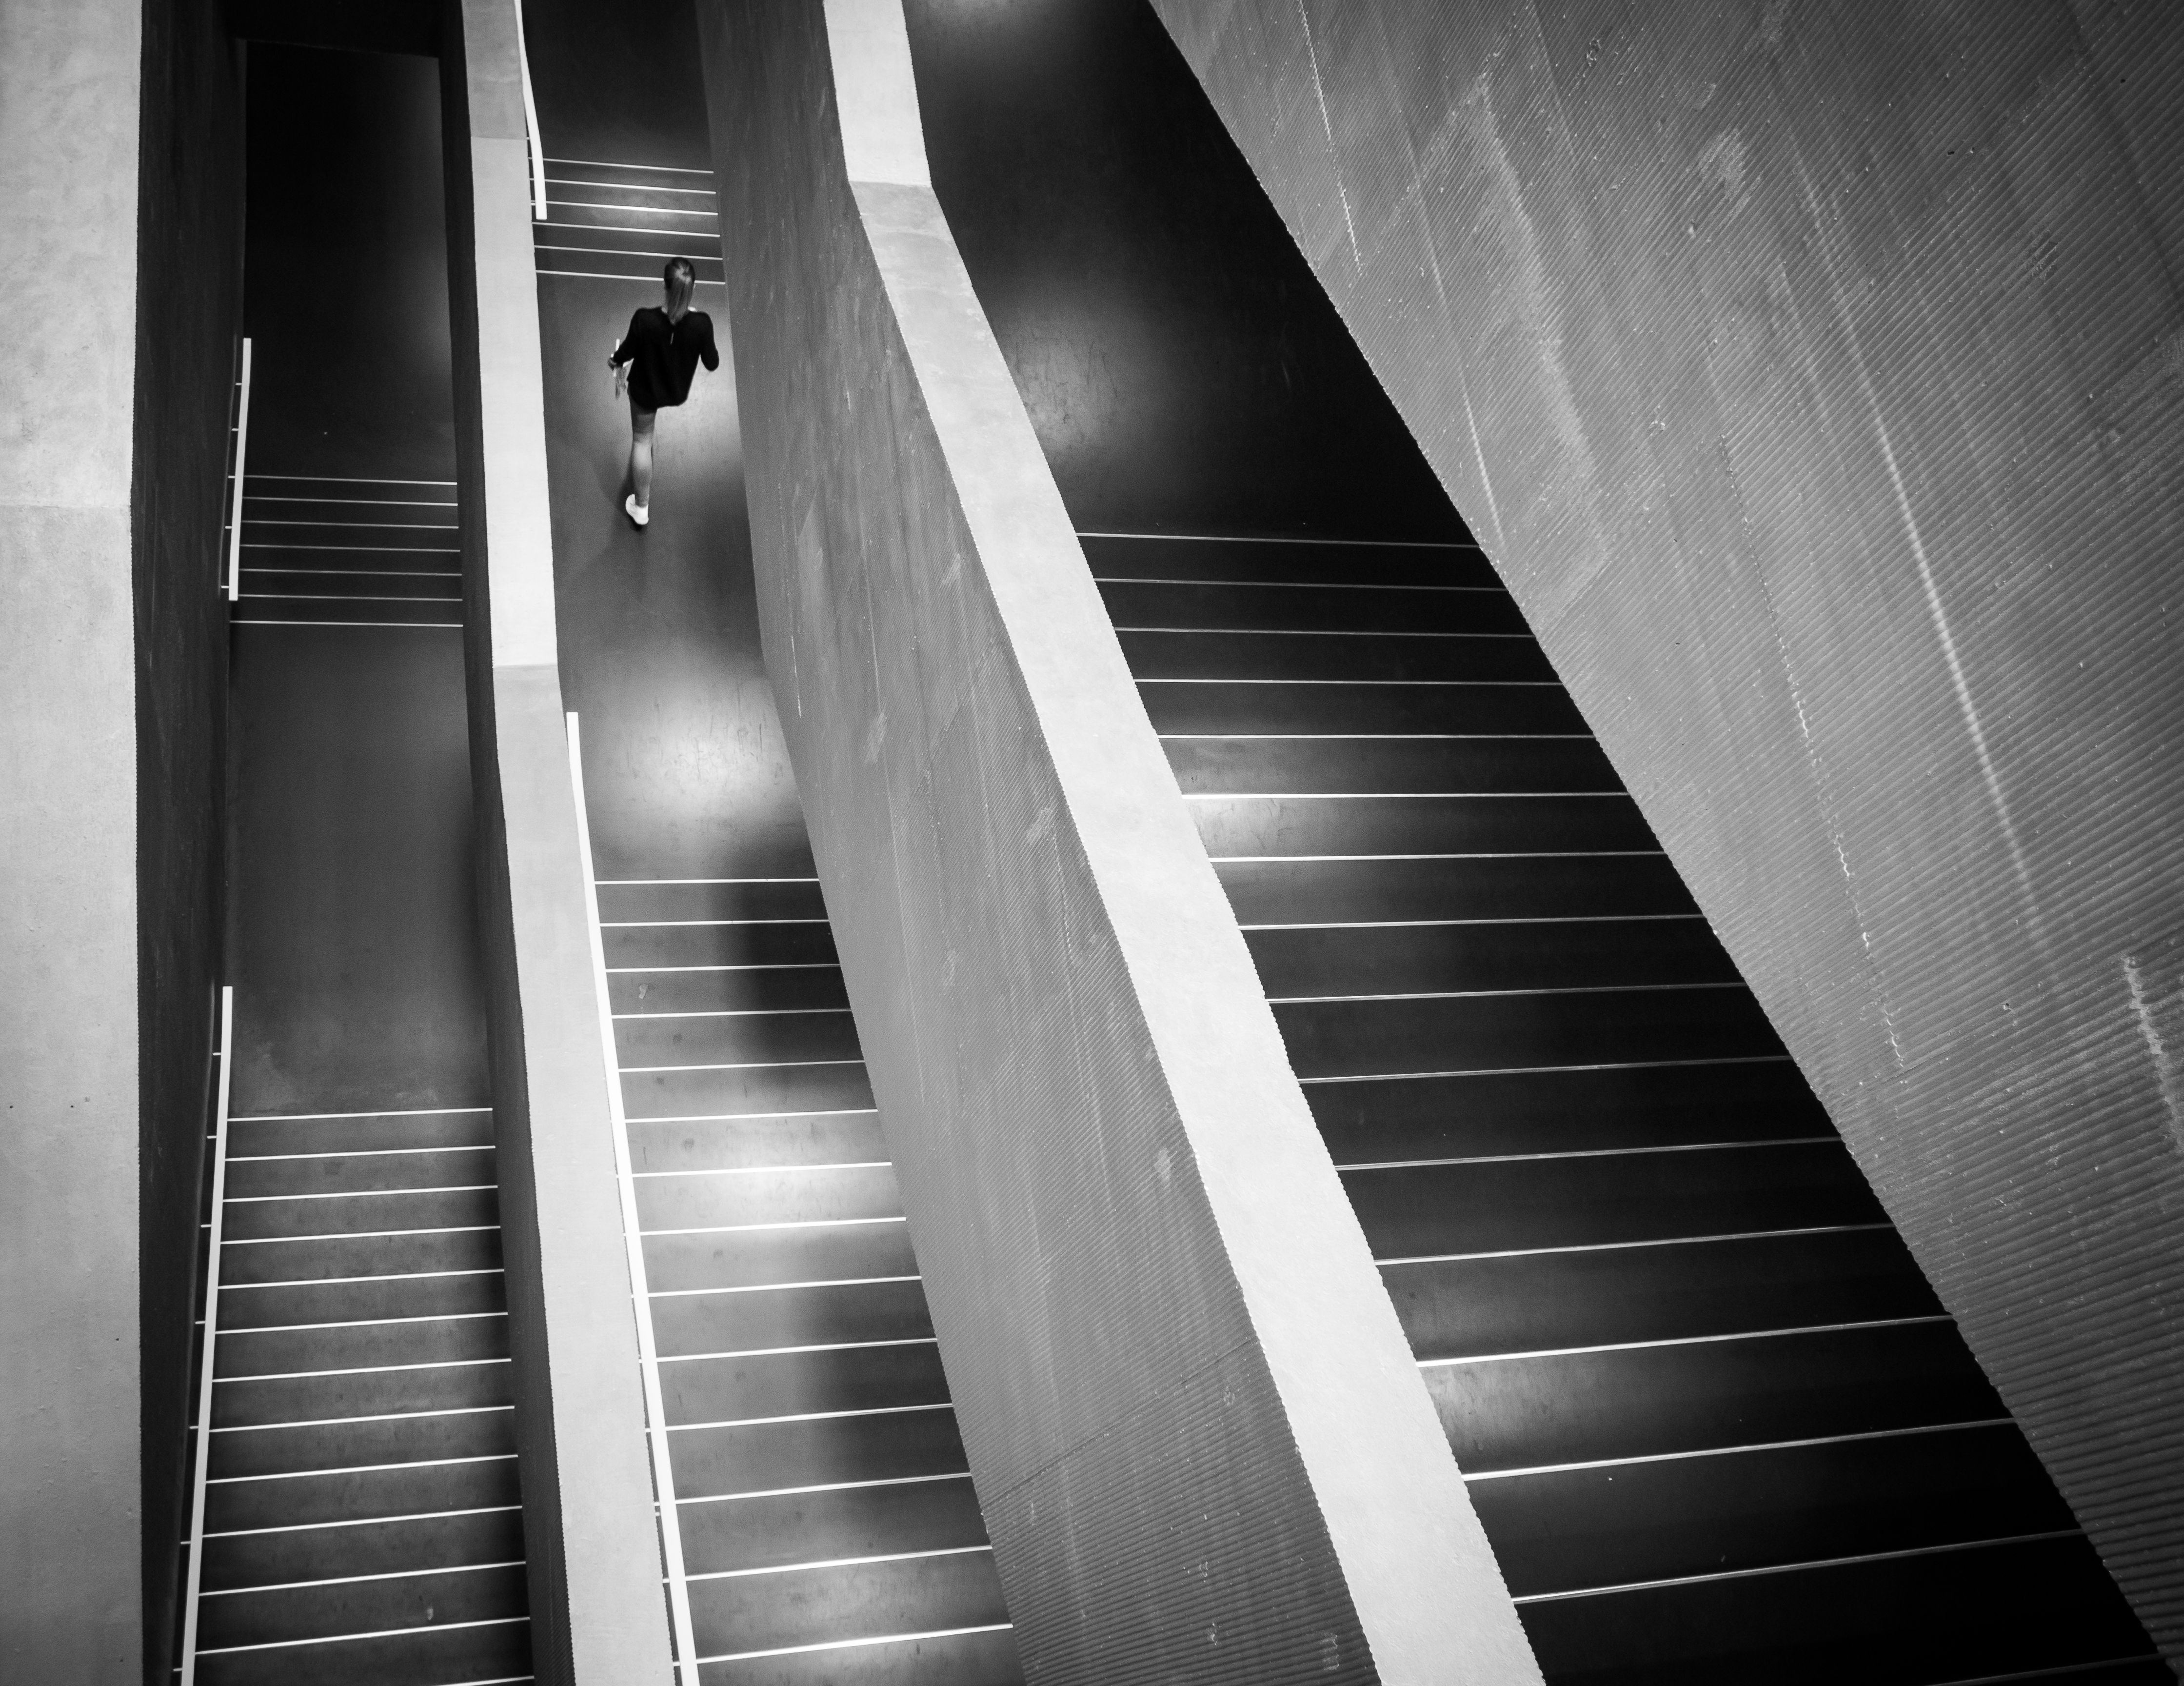 minimalism, bw, chb, stairs, ladder, human, person Aesthetic wallpaper